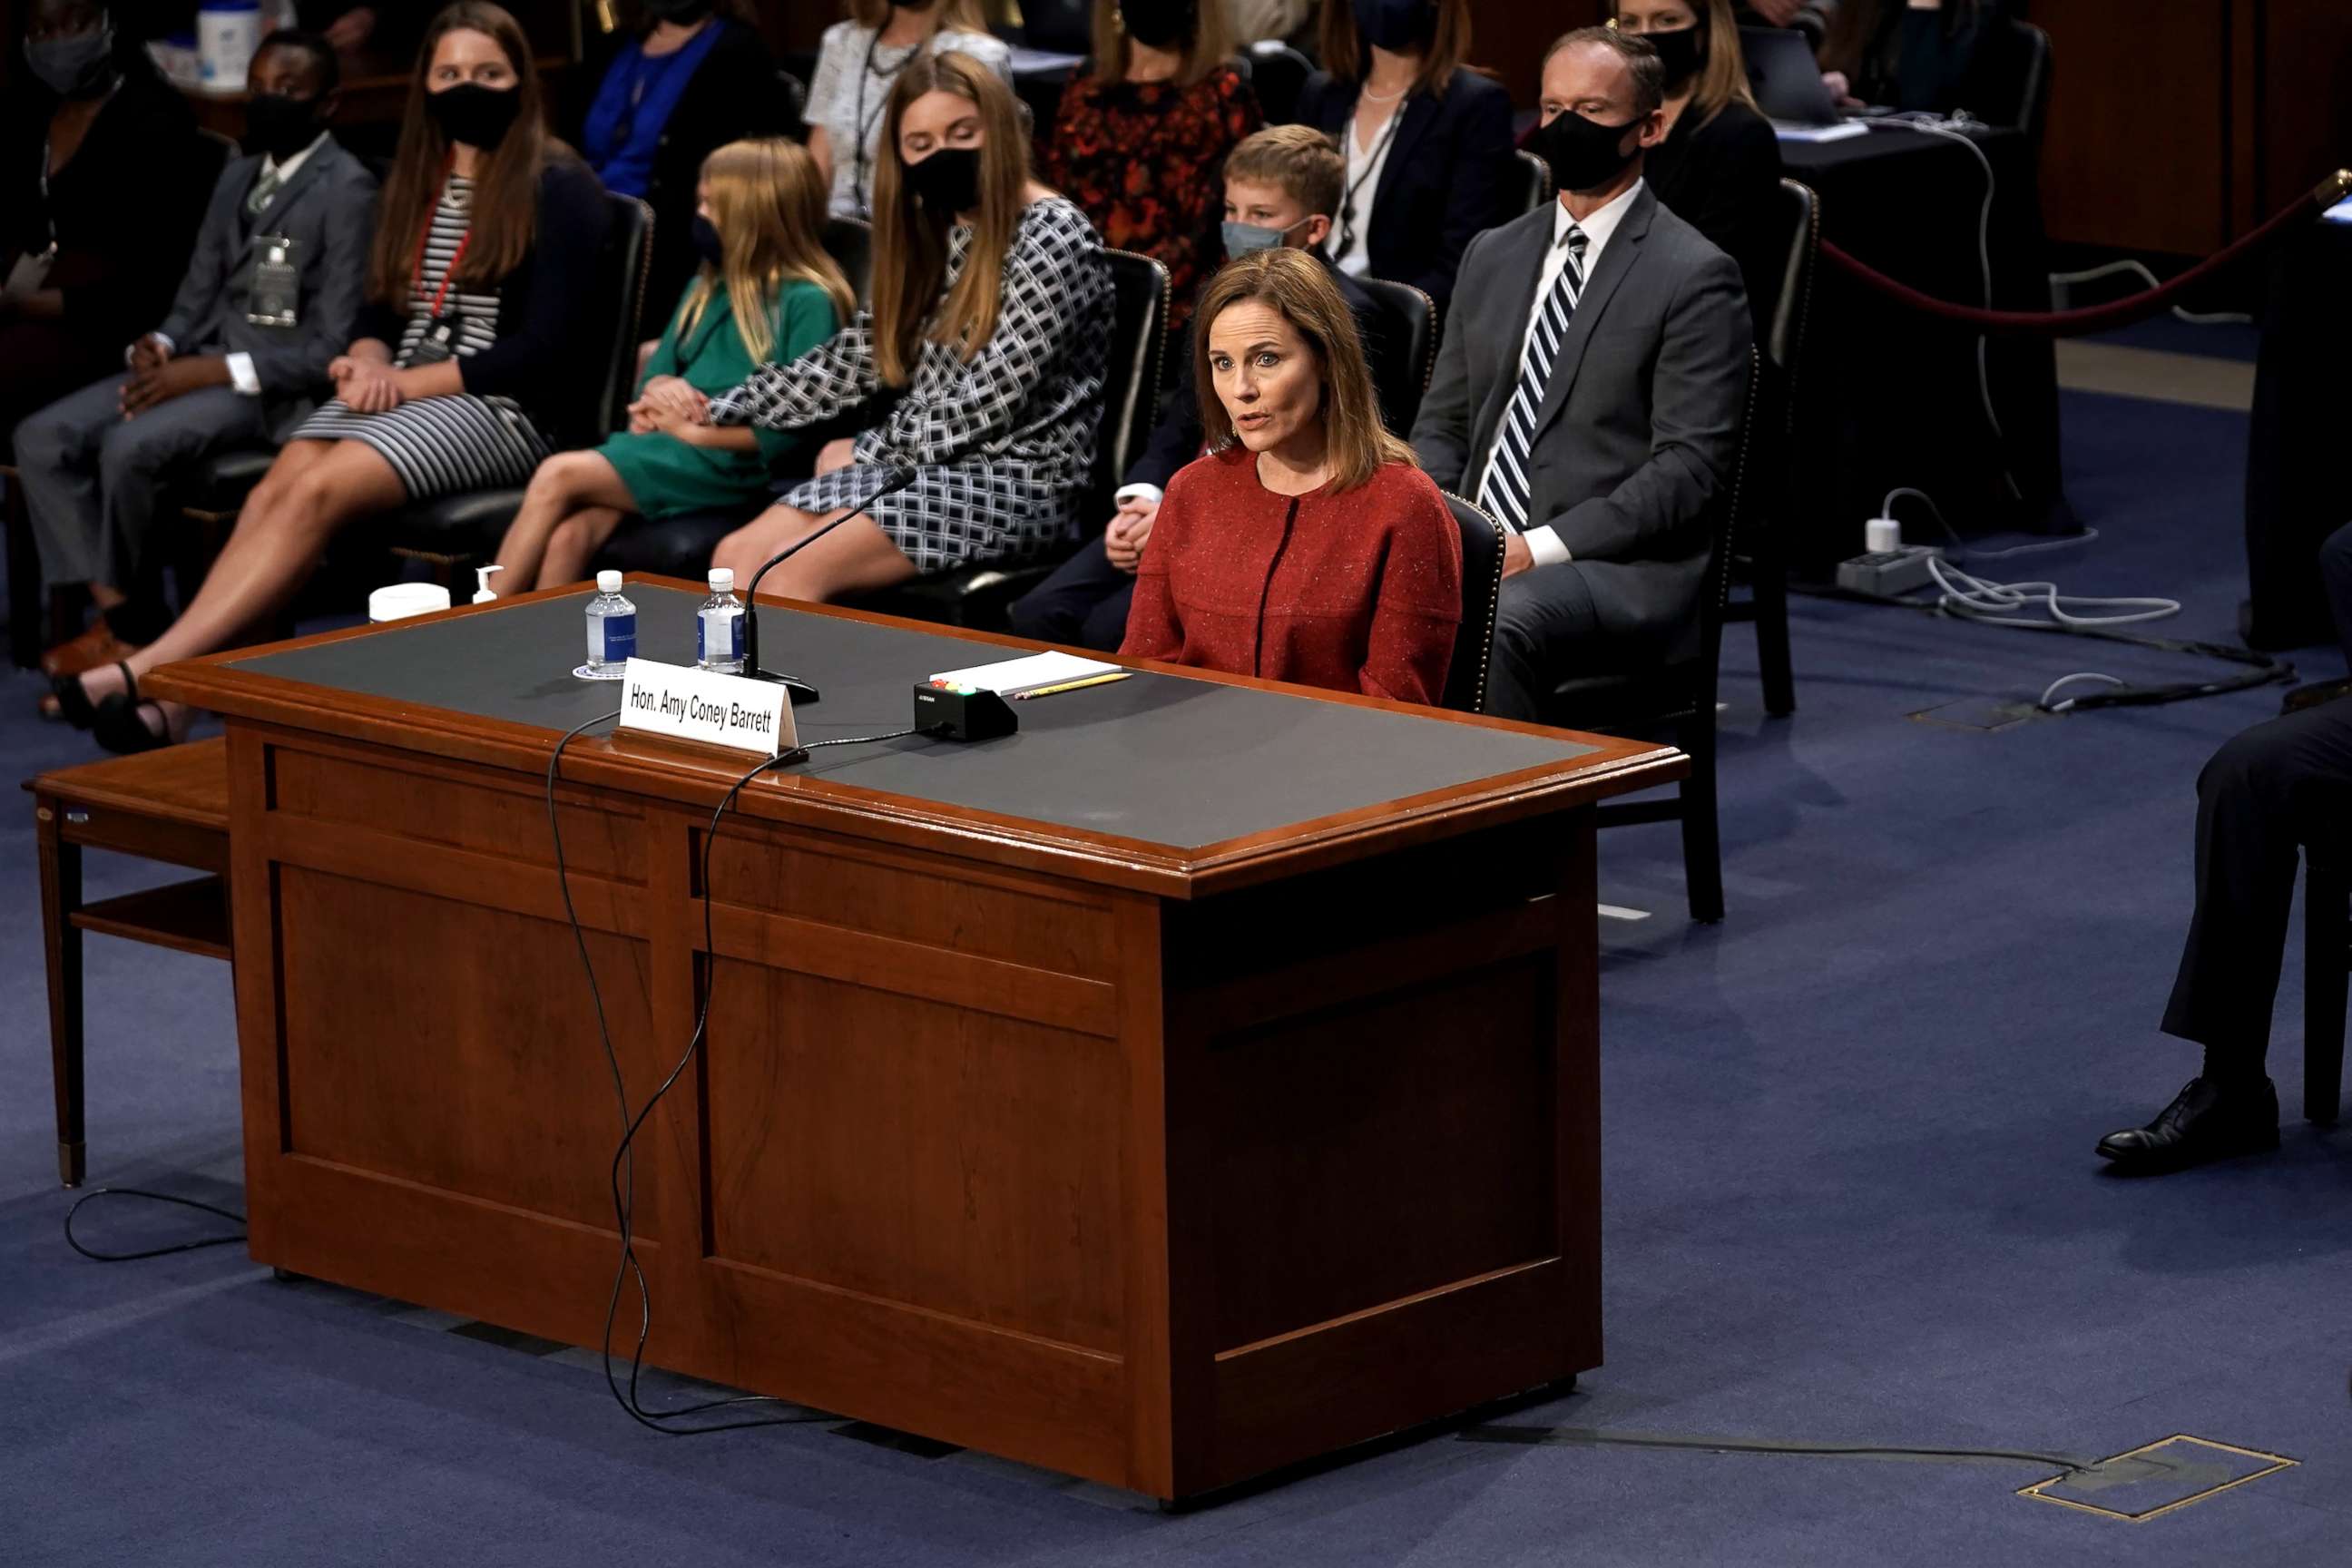 PHOTO: Supreme Court nominee Judge Amy Coney Barrett testifies before the Senate Judiciary Committee on the second day of her Supreme Court confirmation hearing on Capitol Hill, Oct. 13, 2020 in Washington, DC.